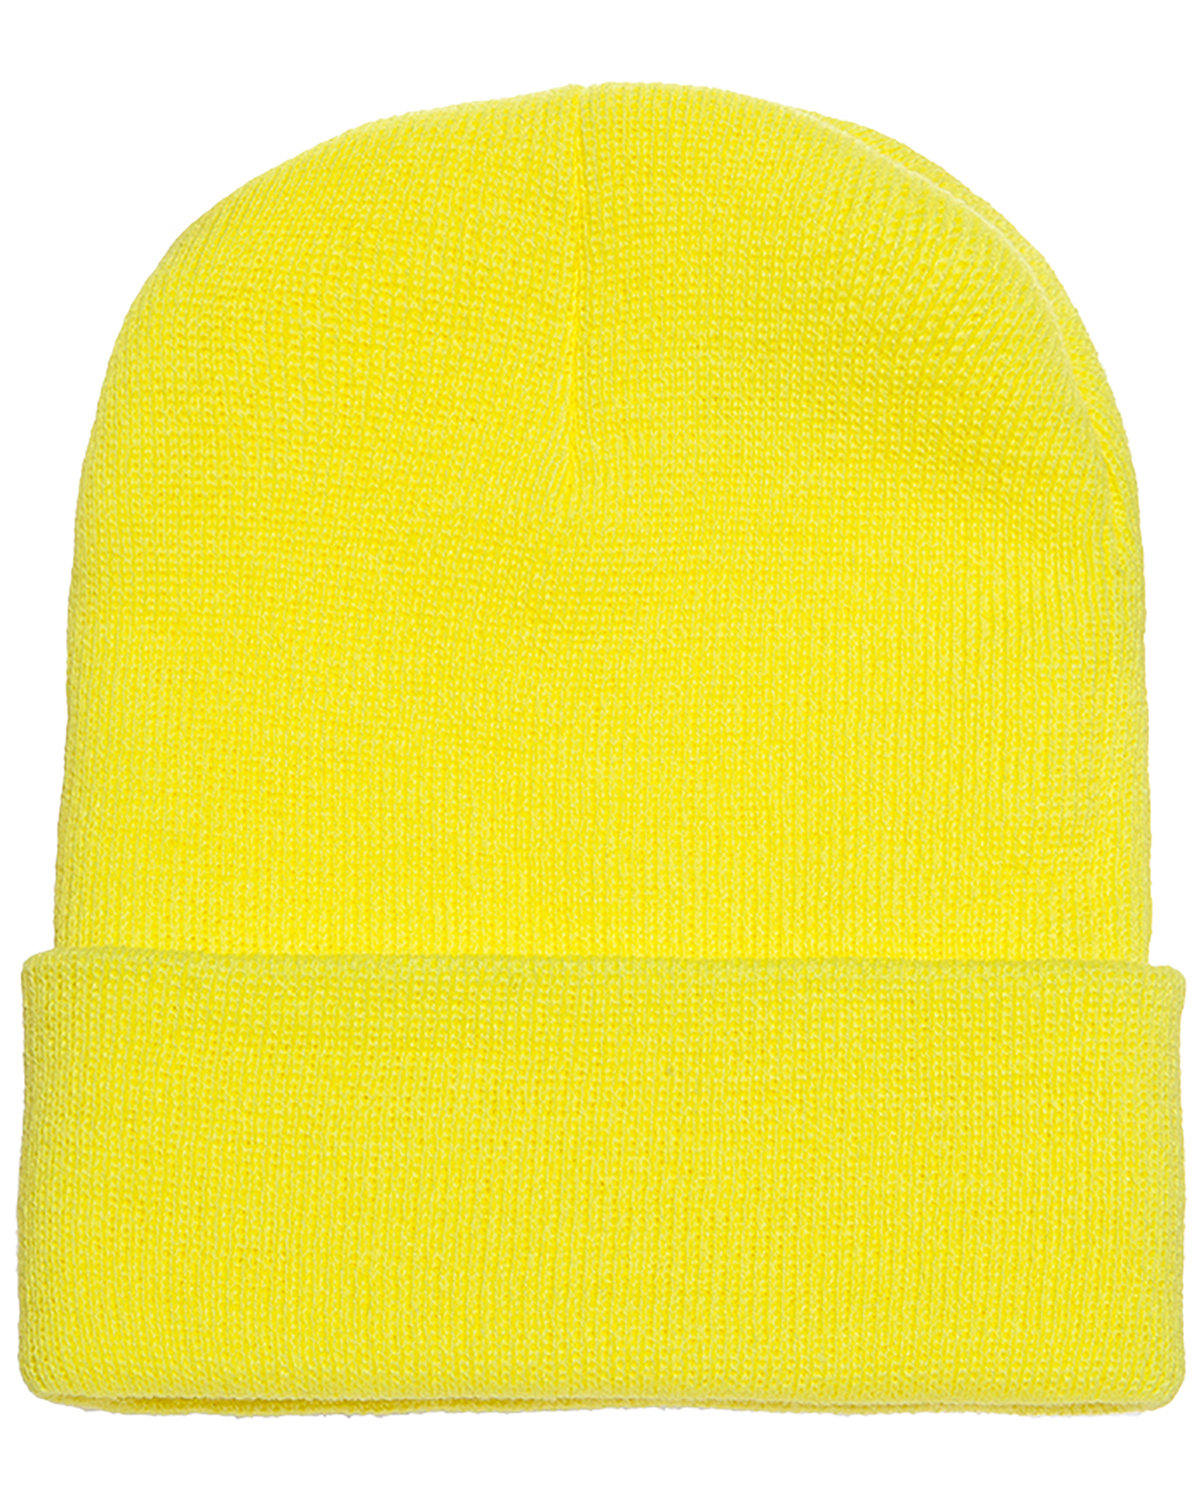 Yupoong Adult Cuffed Knit Beanie | Generic Site - Priced